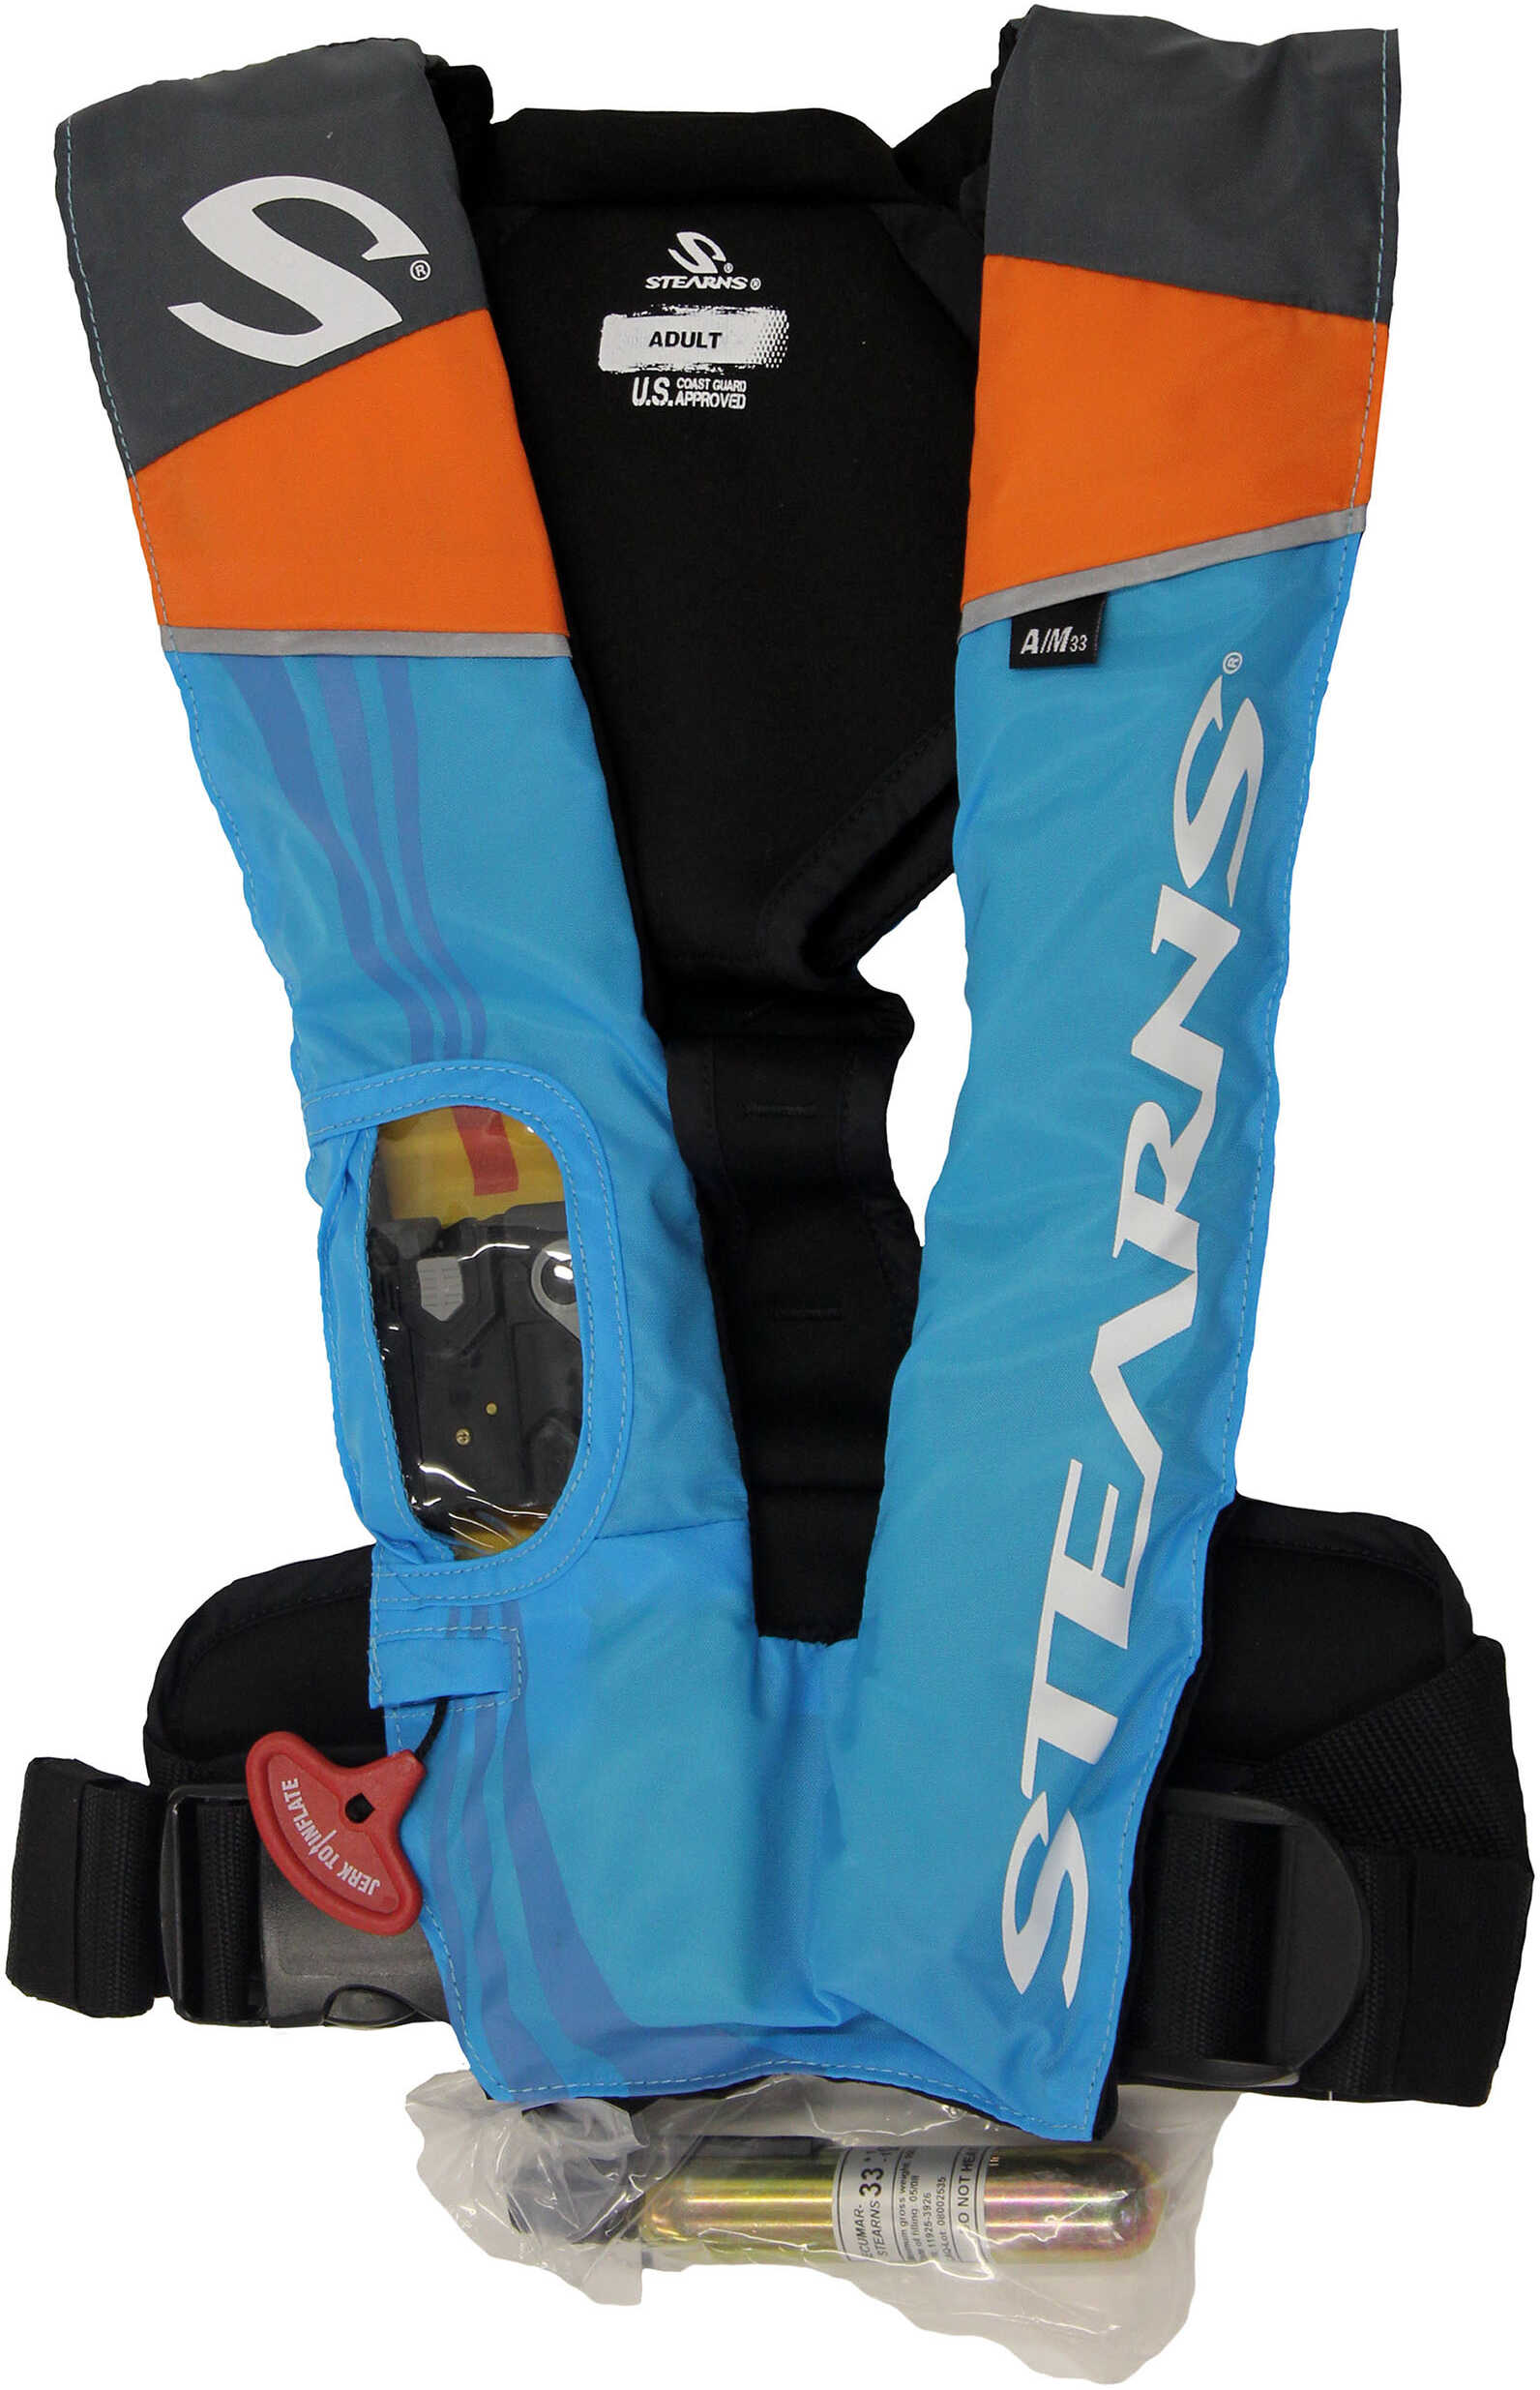 Stearns 1493 A/M - 33g Auto/Manual Inflatable PFD - Blue/Orange/Grey